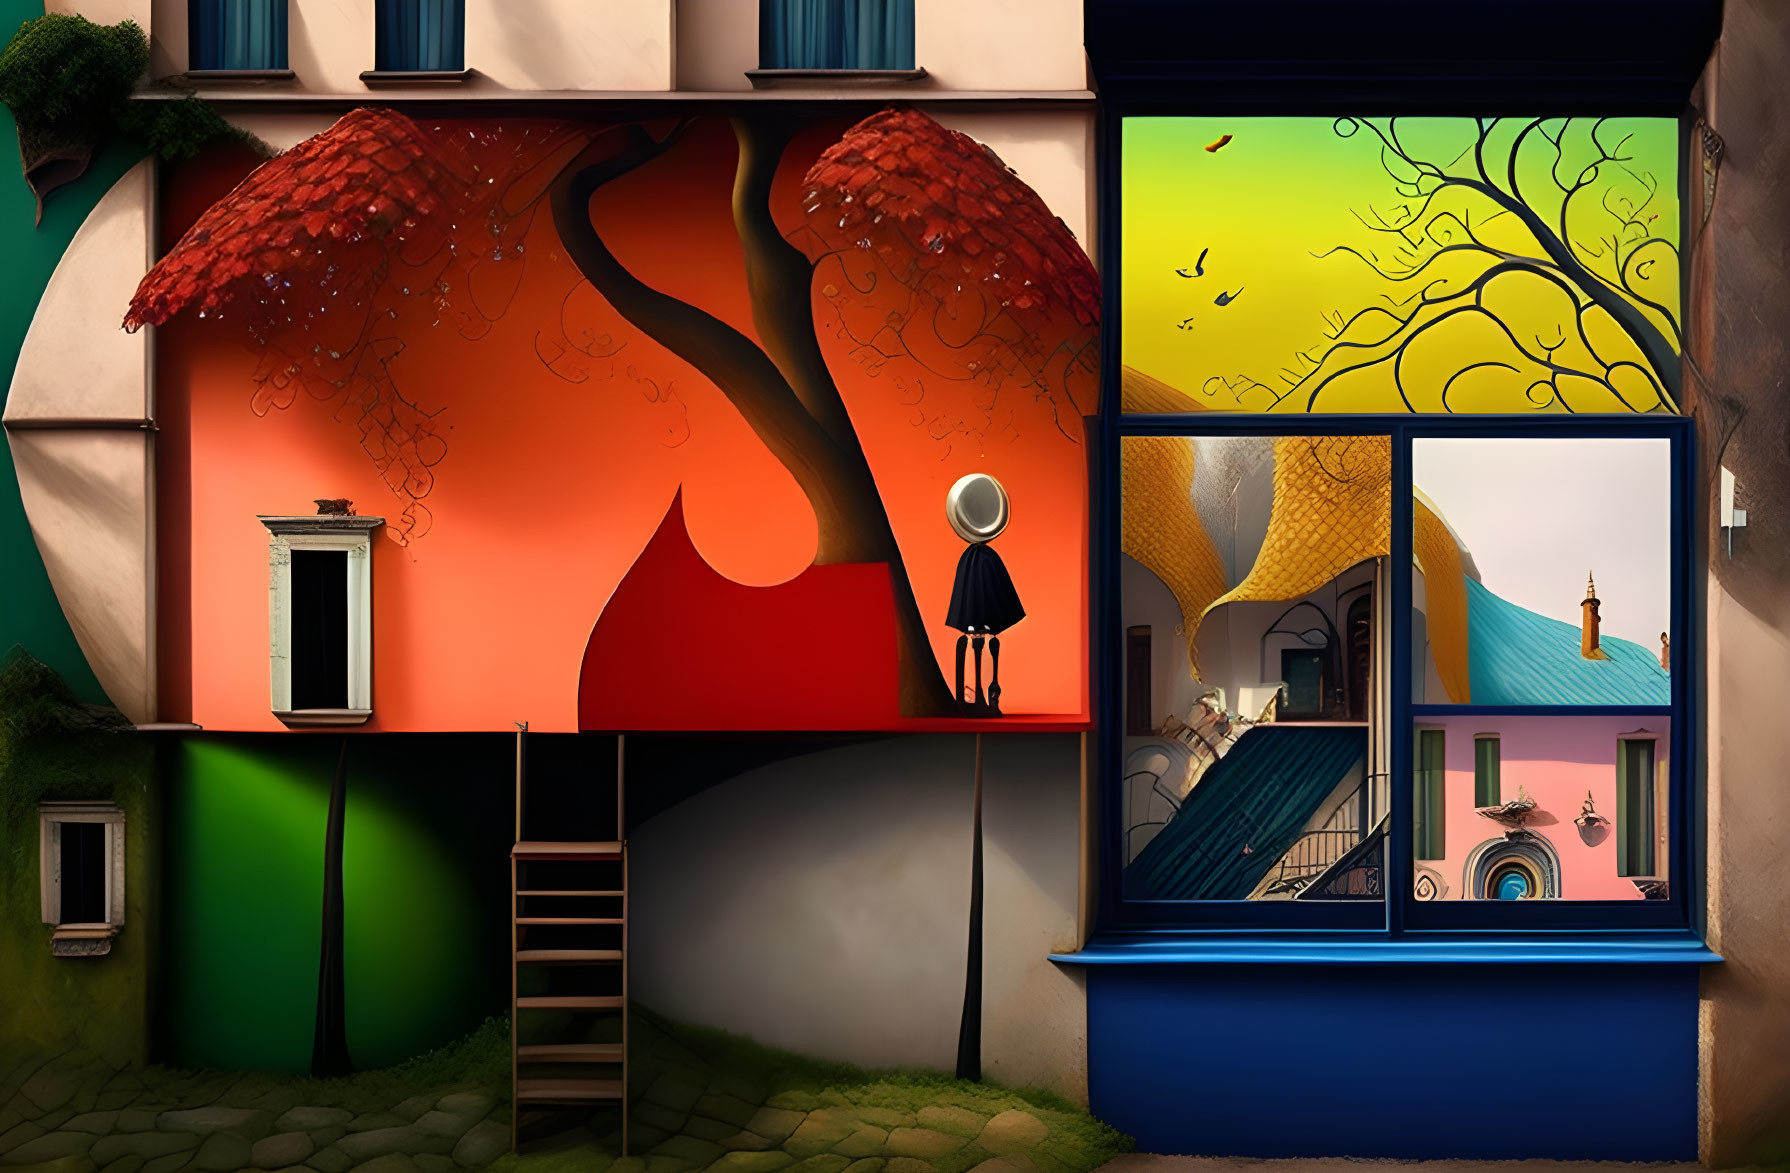 Colorful Surreal Building Artwork with Whimsical Windows & Characters